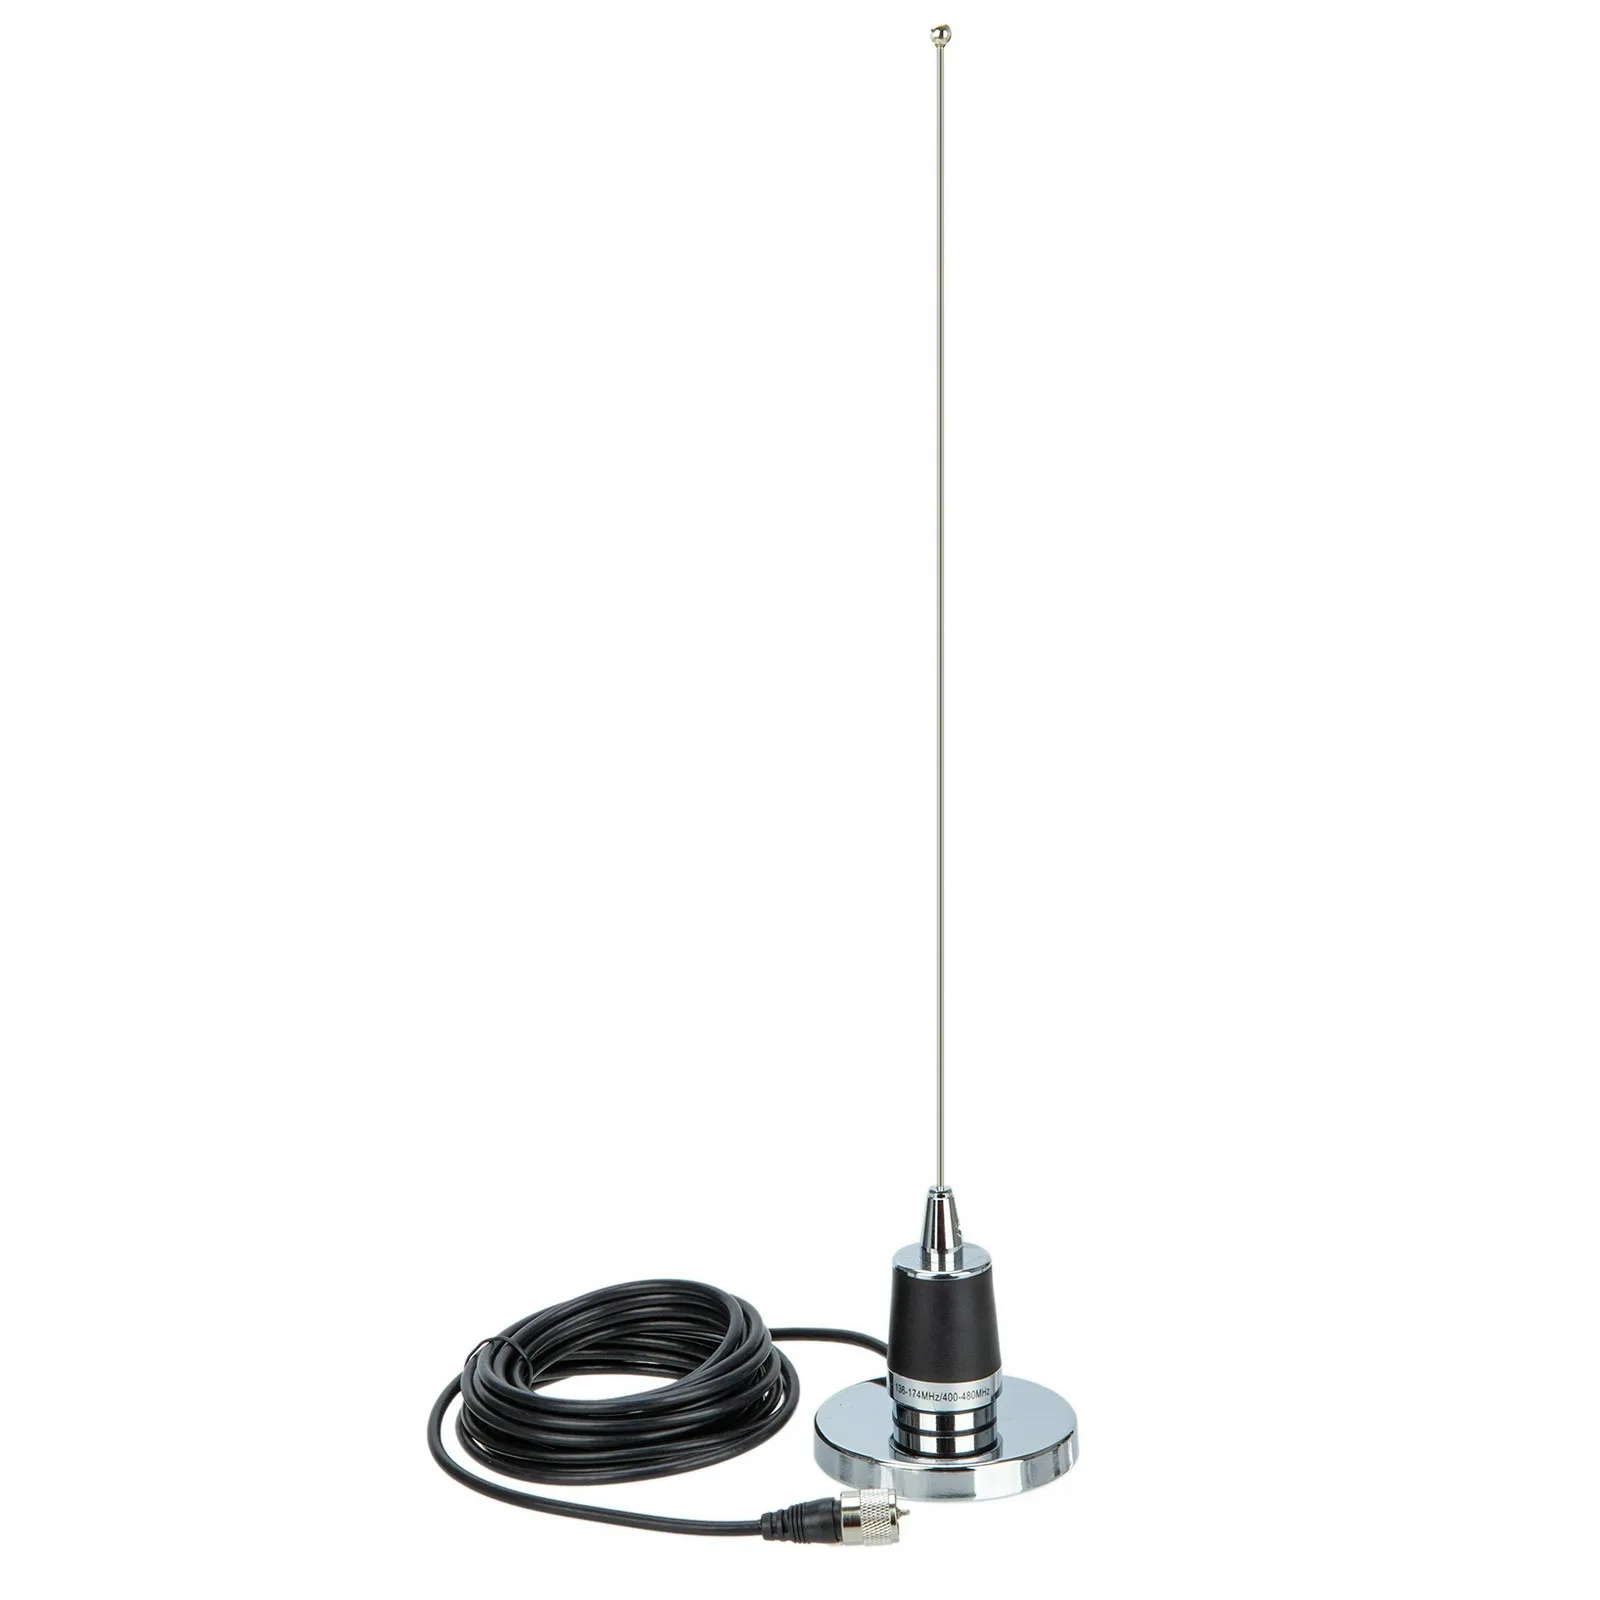 

NMO Antenna with NB-90 9CM NMO Magnetic Mount Base With 5M PL-259 Connector Coaxial RG-58 Cable for QYT TYT Car Mobile Radio